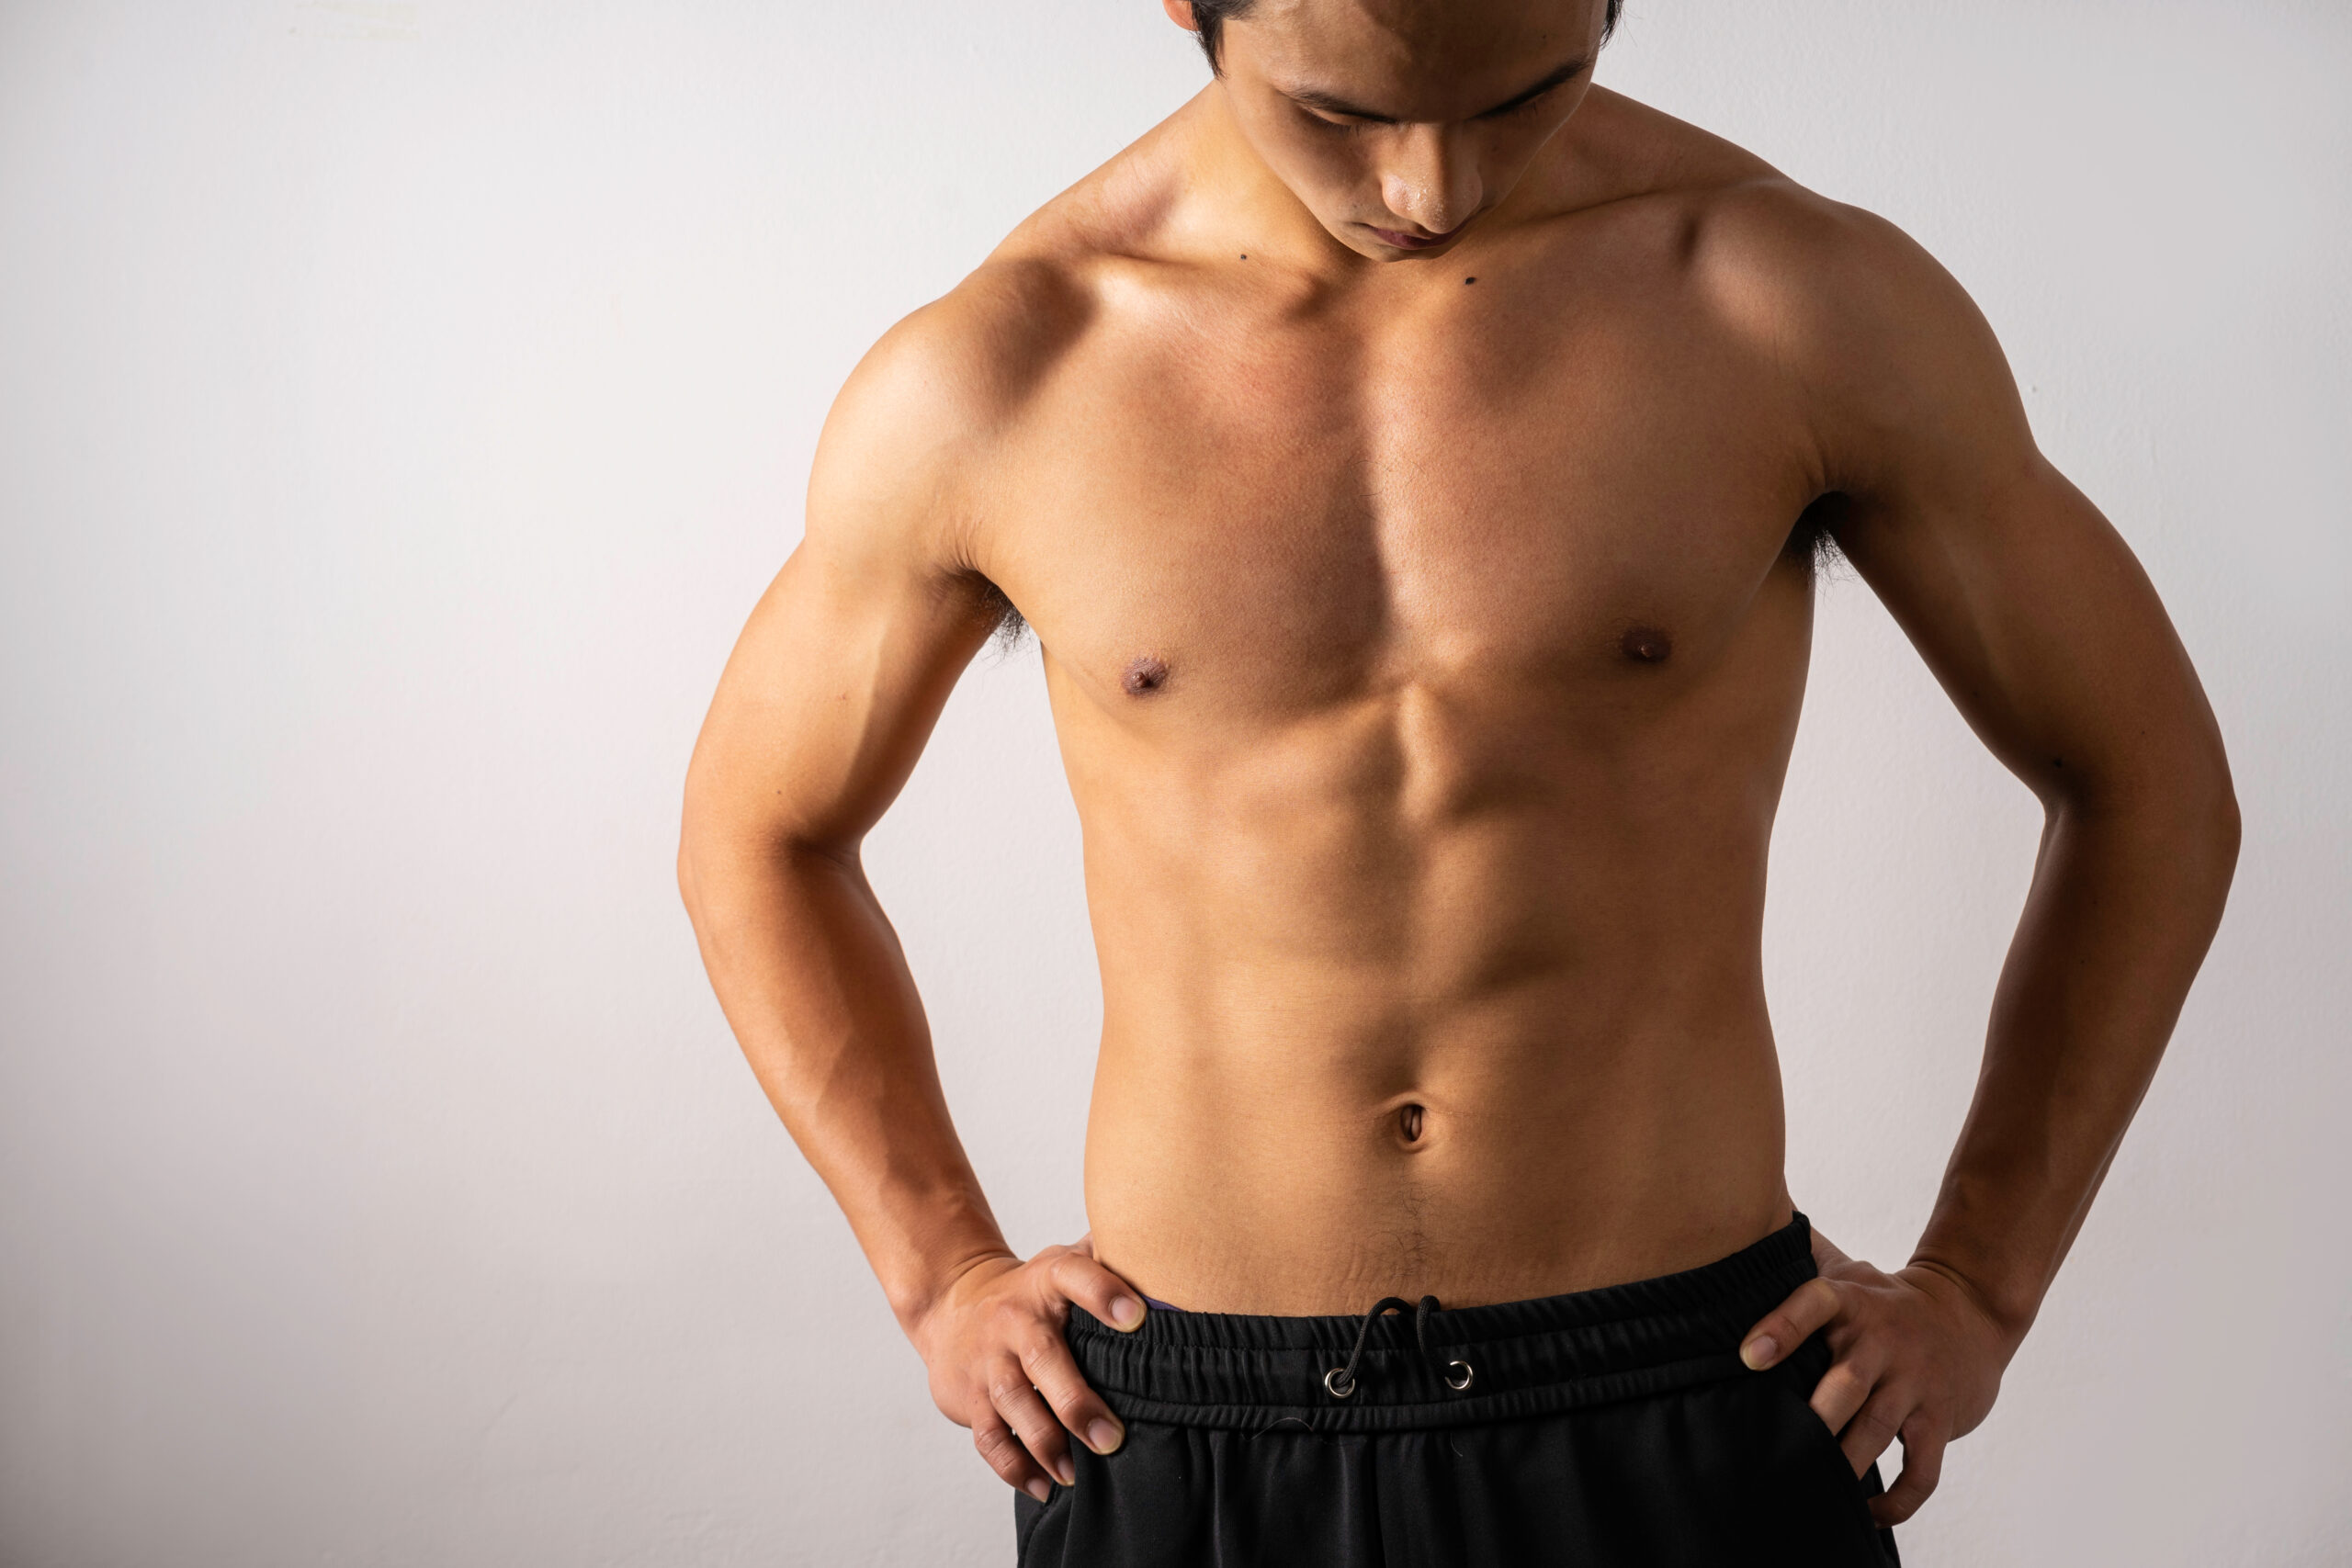 shirtless athletic man with defined muscles after body contouring